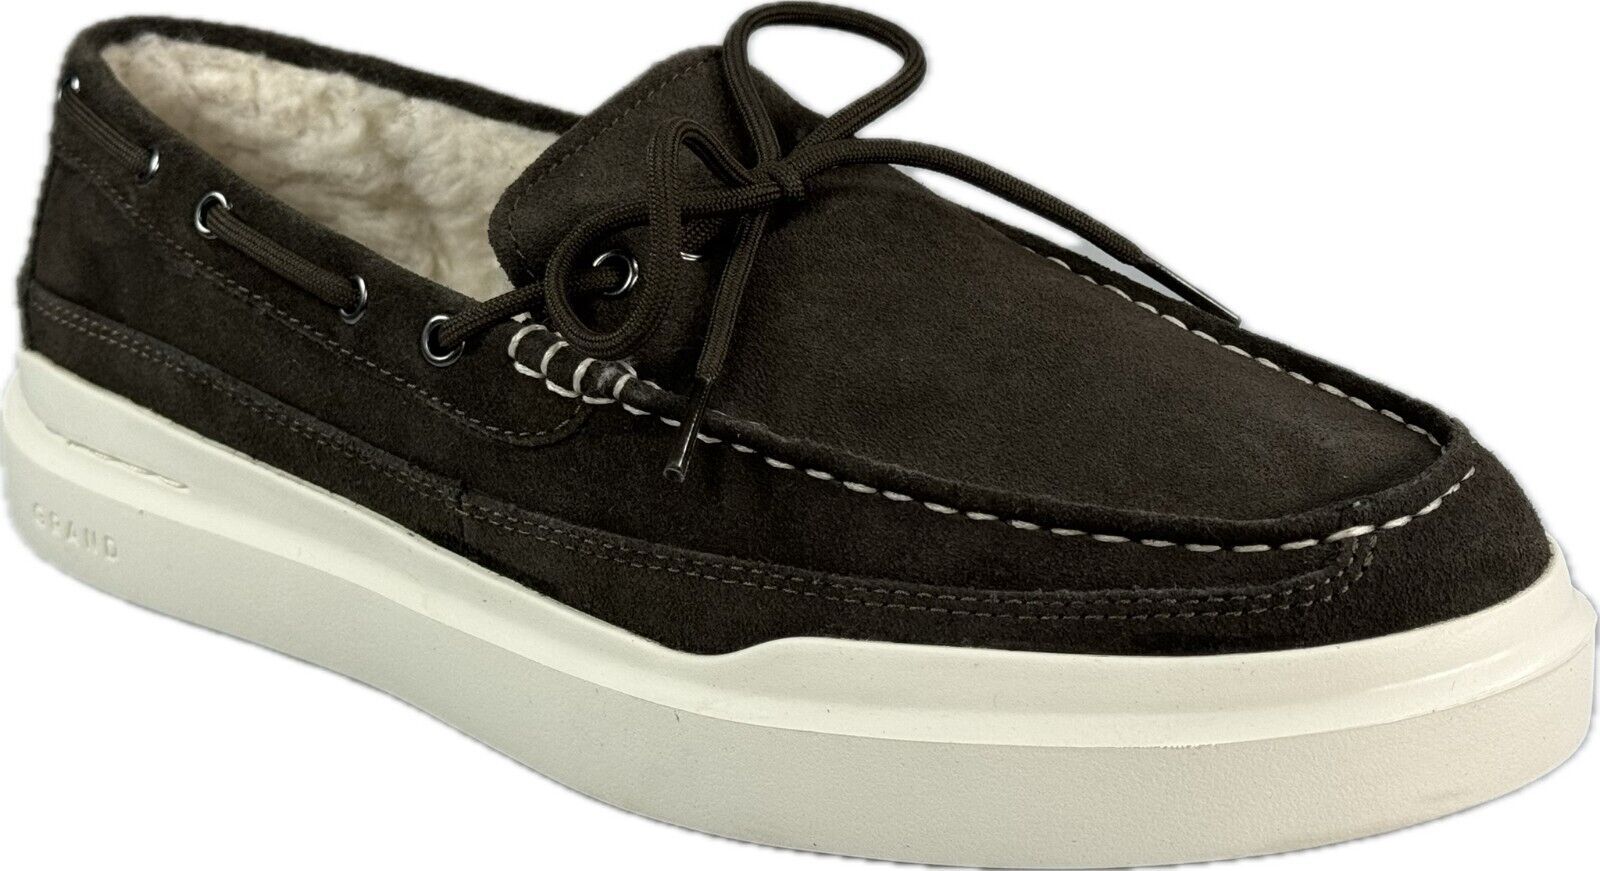 Primary image for COLE HAAN Men's GRANDPRO RALLY SLIPON Brown Suede Slip-On Shoes C34584